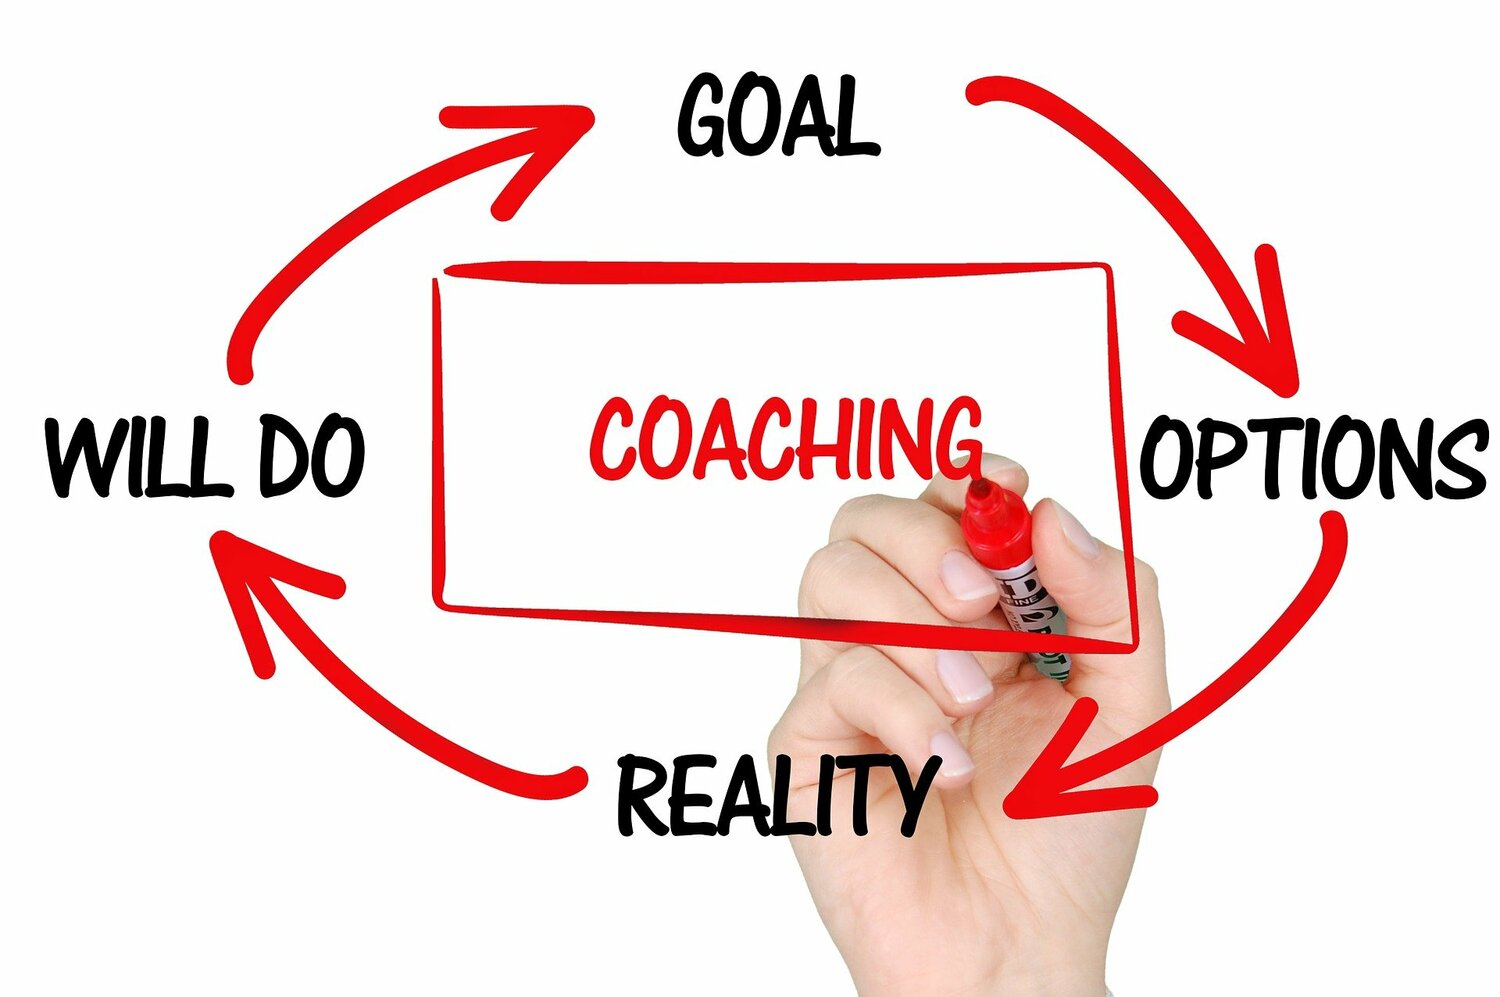 <span style="font-weight: bold;">Life Coaching</span>